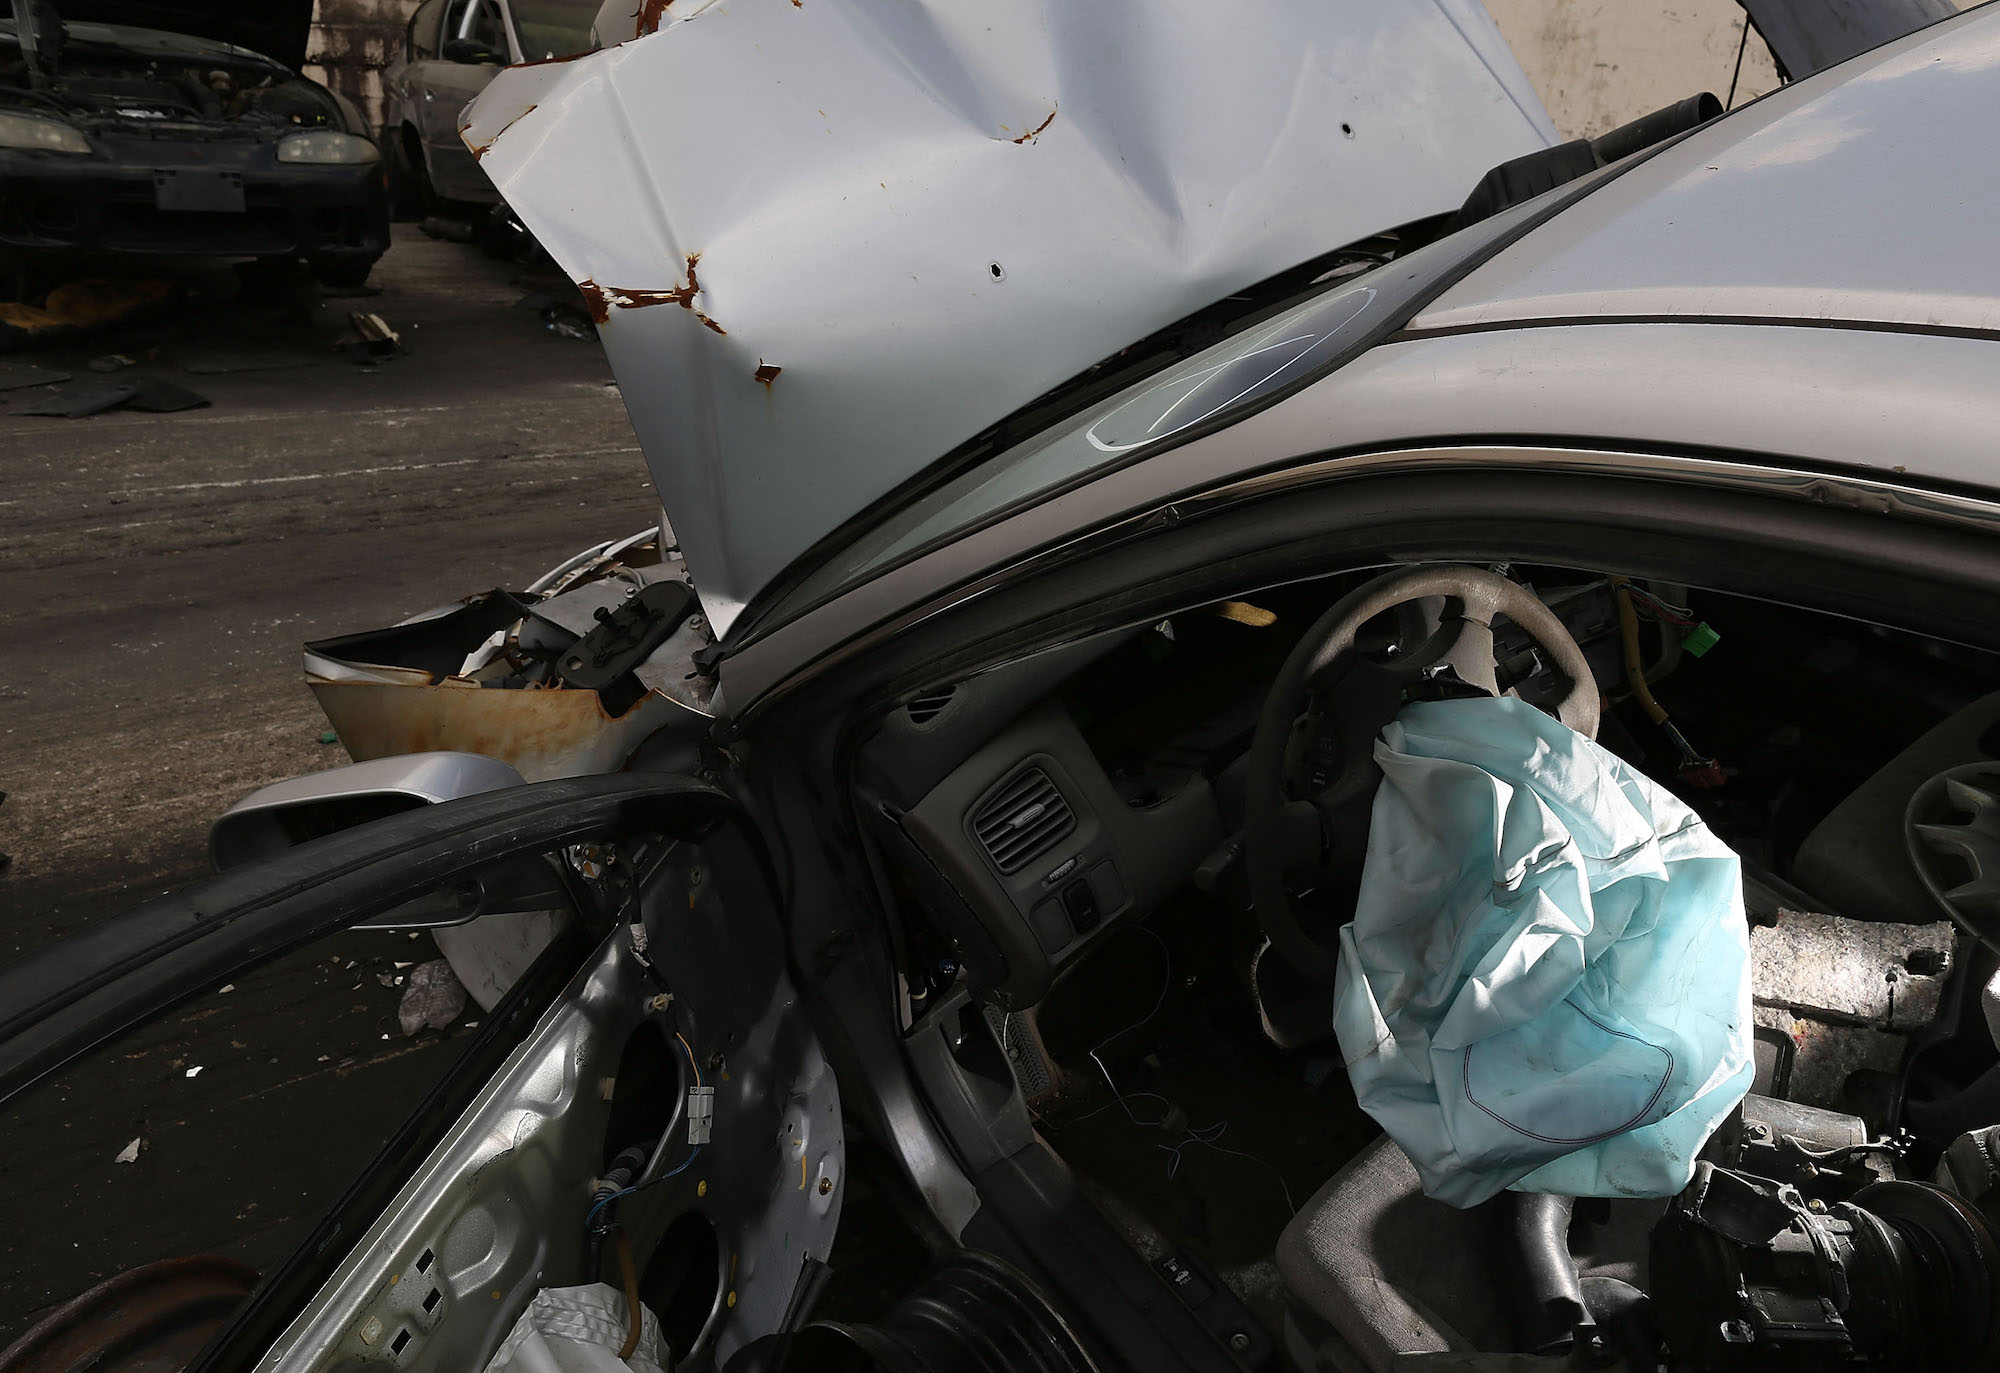 A deployed airbag is seen in a 2001 Honda Accord at the LKQ Pick Your Part salvage yard on May 22, 2015, in Medley, Florida